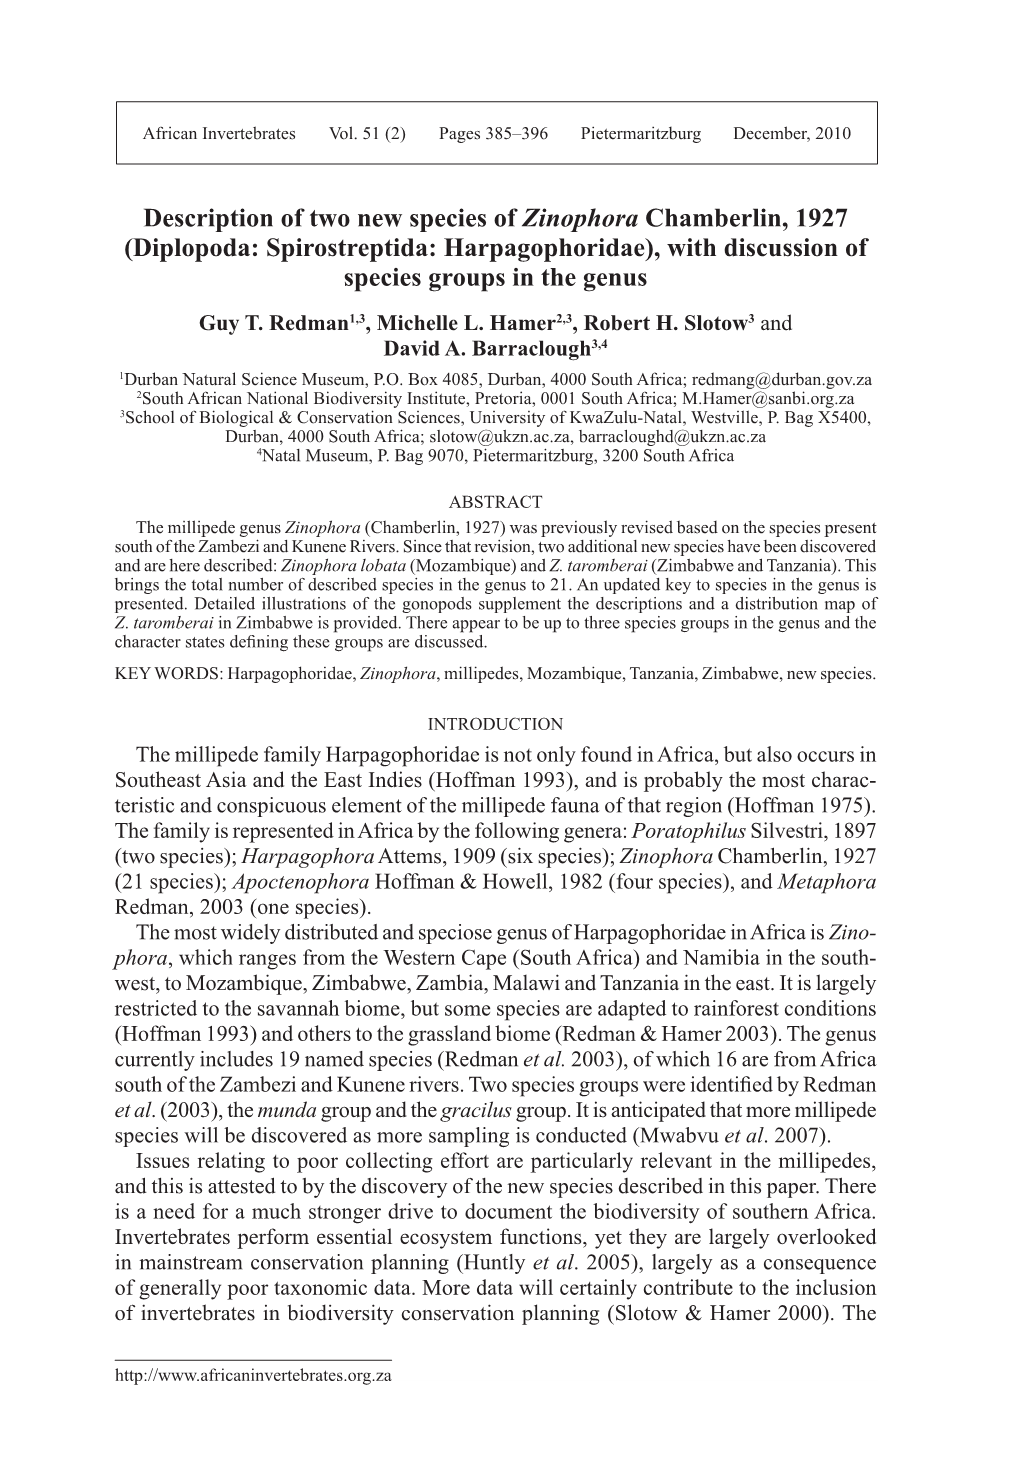 Diplopoda: Spirostreptida: Harpagophoridae), with Discussion of Species Groups in the Genus Guy T